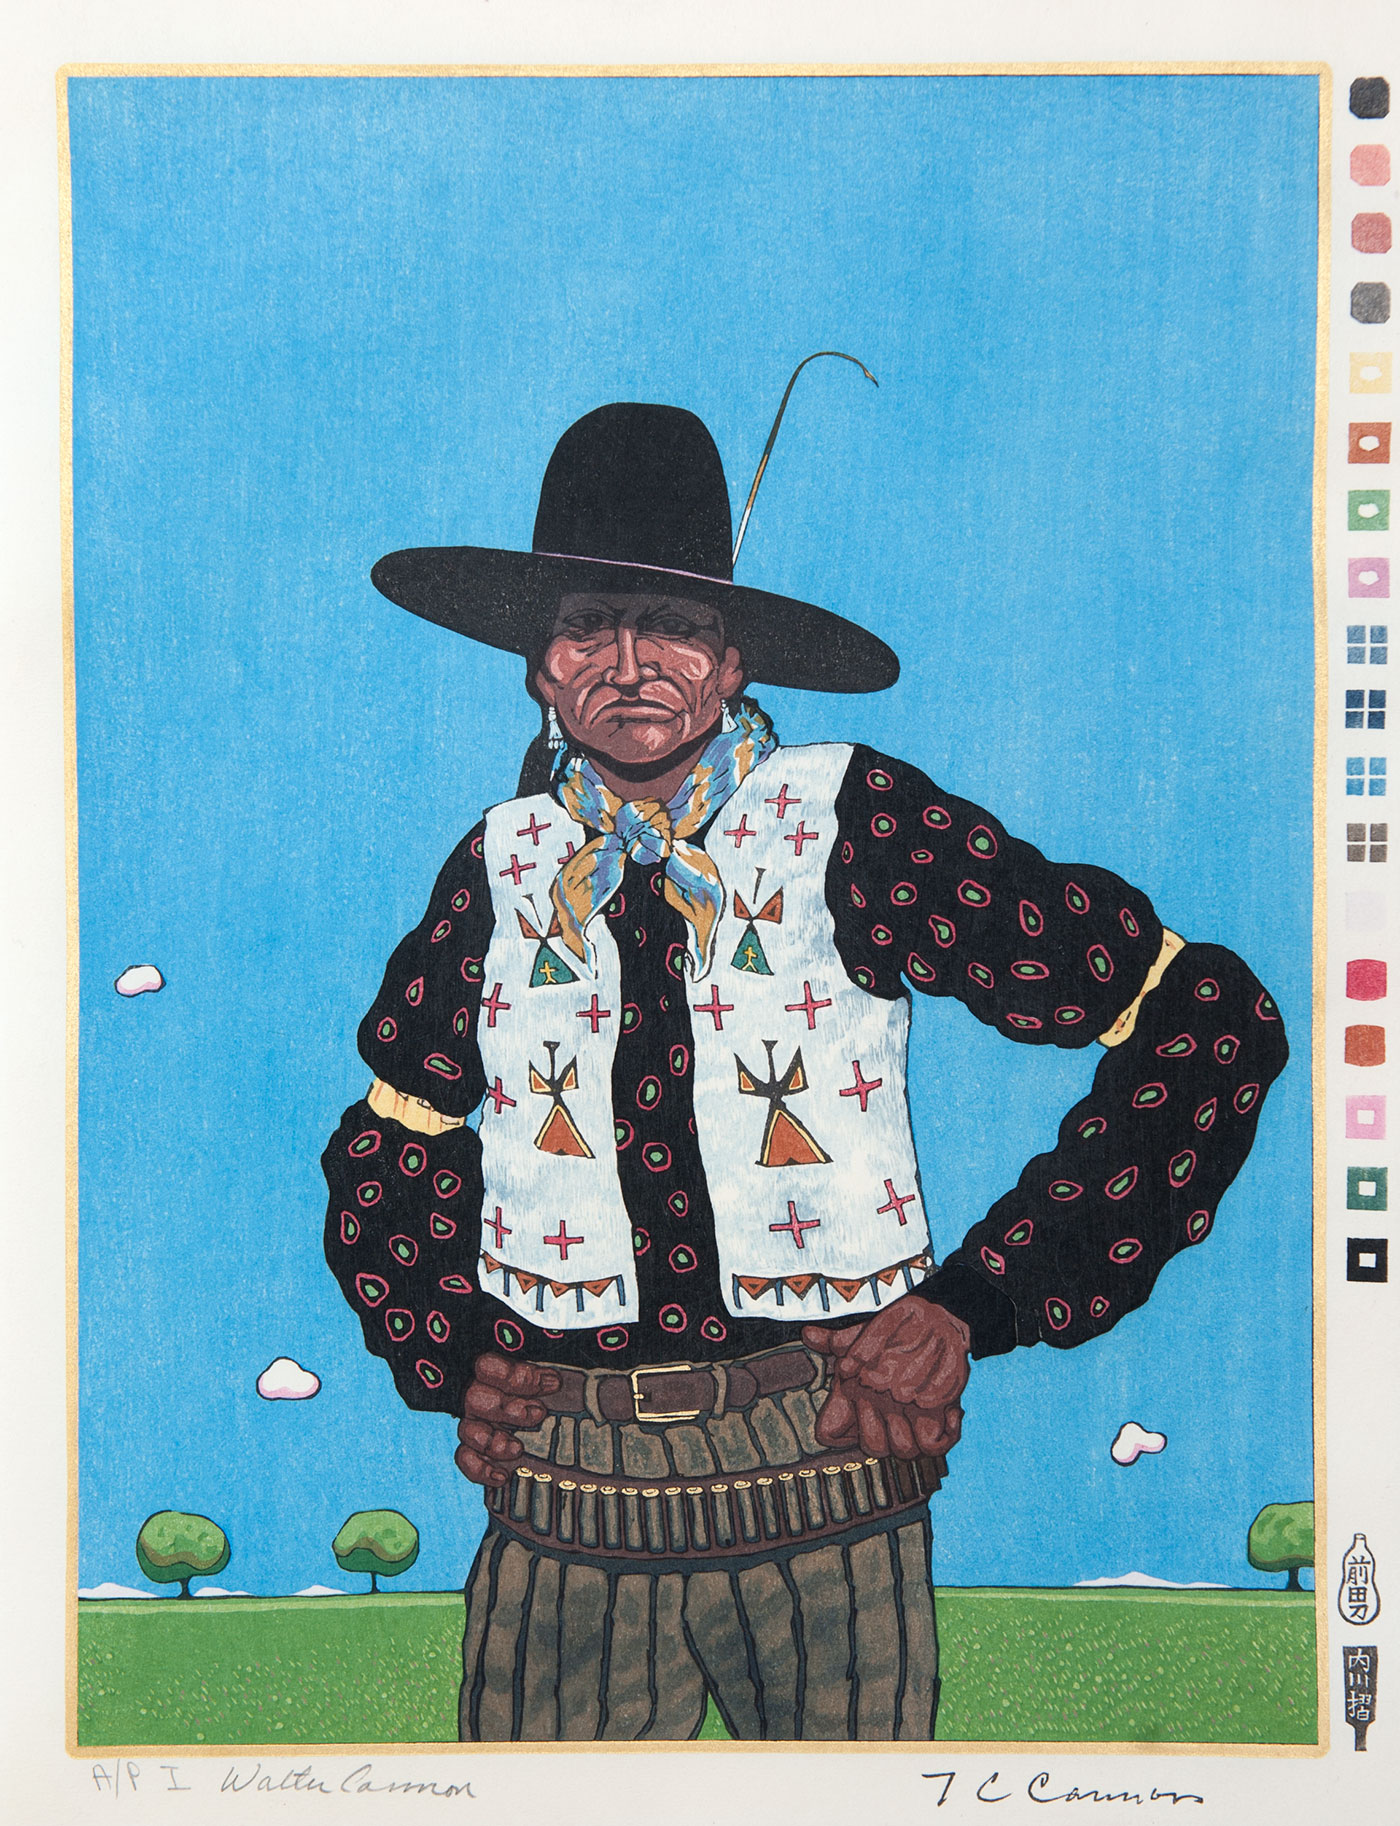 Three-quarter portrait of a Native American man wearing a black hat with a piece of straw on the proper left side. Subject wears silver, dangling earrings, a blue and yellow scarf, a white vest with red crosses and a teepee motif, a black shirt with green polka dots surrounded by red rings, yellow armbands, green striped pants with stripes, a leather belt and a belt of bullets. He stands against a blue sky with small white clouds in a green flat landscape with three trees on the horizon.